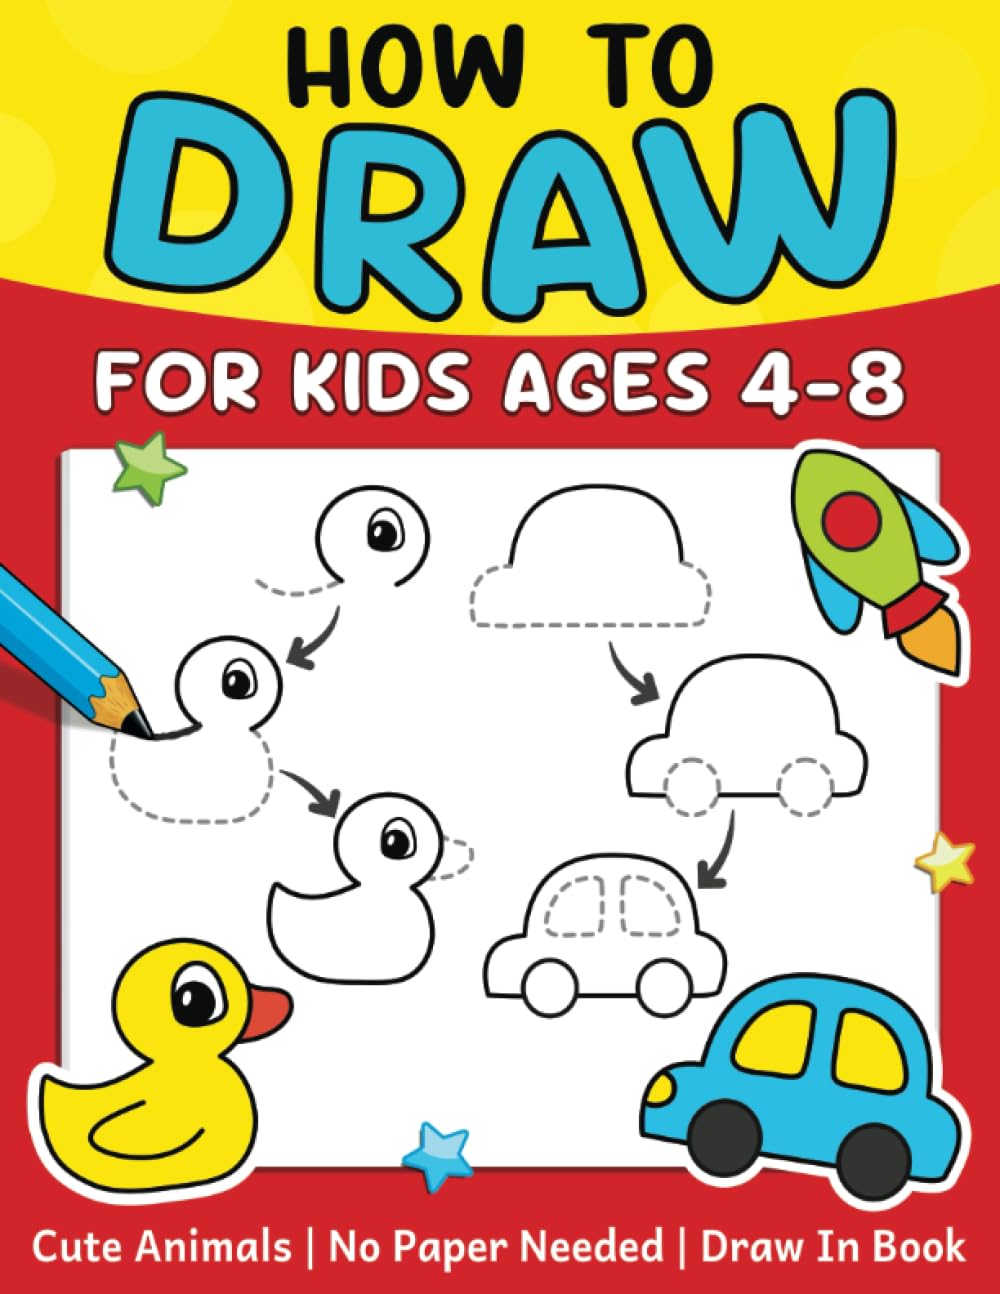 How To Draw For Kids (No Paper Needed): Step By Step Guide To Drawing Cute Animals, Cars, Toys, Unicorns and More | Fun Coloring and Activity Book For Kids Ages 4-8